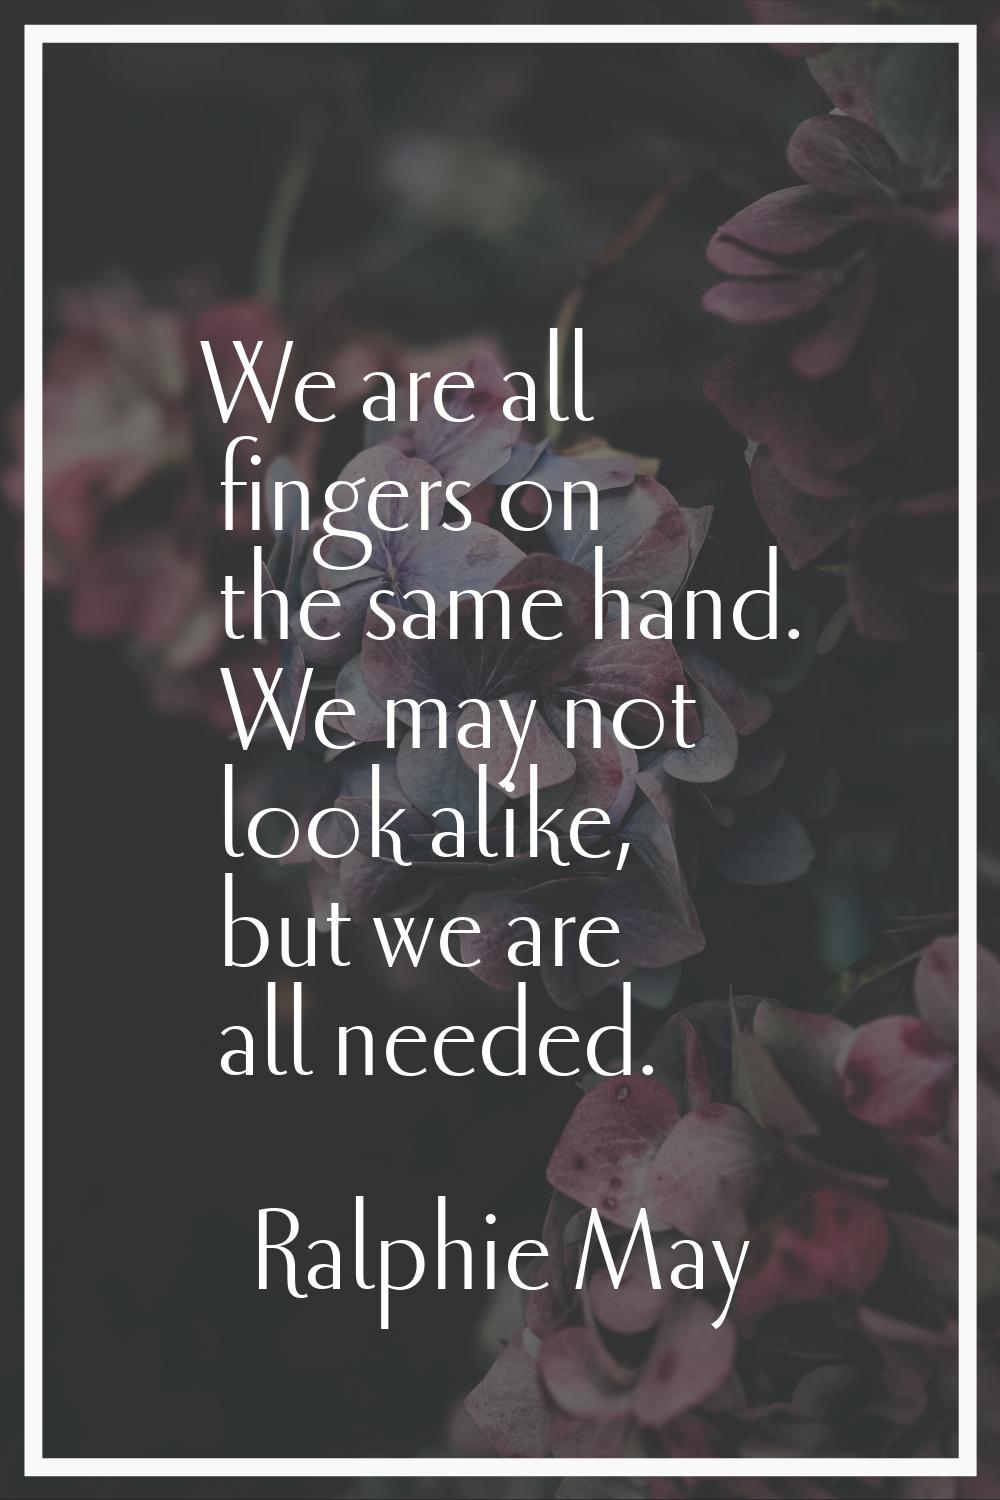 We are all fingers on the same hand. We may not look alike, but we are all needed.